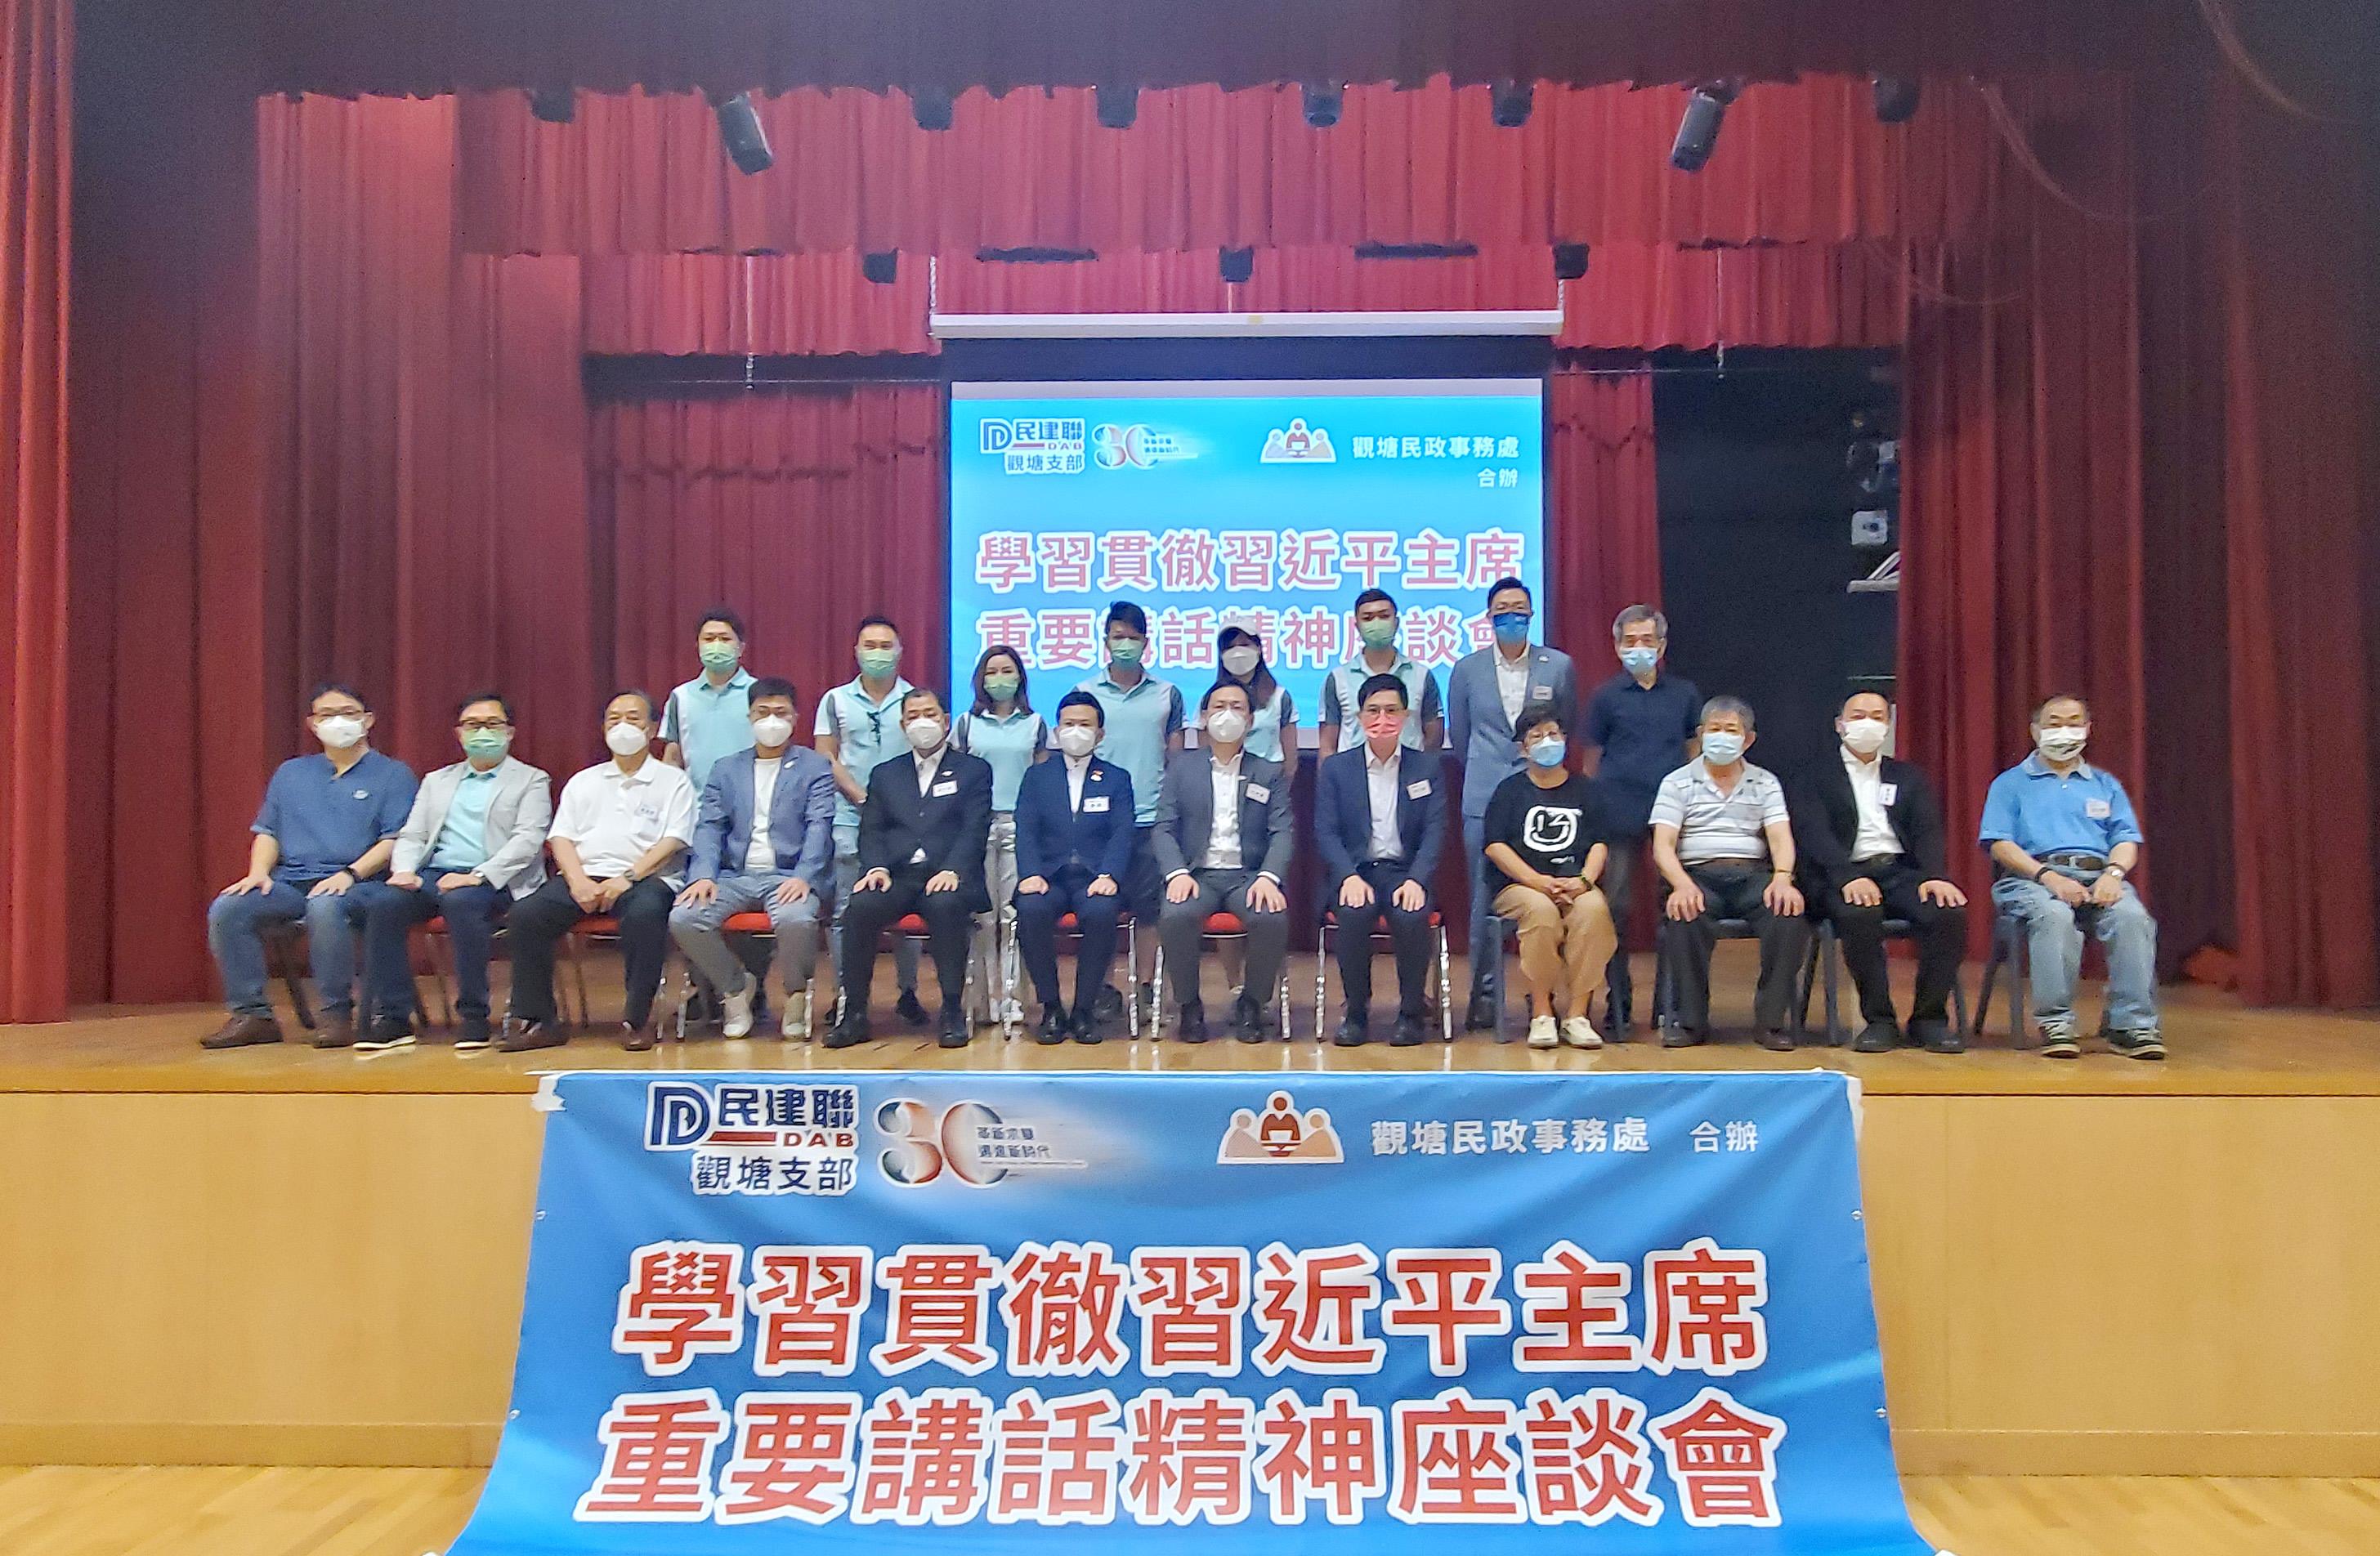 The Kwun Tong District Office and the Kwun Tong Branch of the Democratic Alliance for the Betterment and Progress of Hong Kong (DAB) jointly held a session at Sau Mau Ping Community Hall yesterday (July 10) to learn about, promote and implement the spirit of President Xi Jinping's important speech. Photo shows Member of the Legislative Council (LegCo) Mr Ngan Man-yu (front row, fourth left); Hong Kong Deputy to the National People's Congress and Member of the LegCo Mr Chan Yung (front row, sixth left); the Chairman of the Kwun Tong District Council and the DAB Kwun Tong Branch, Mr Wilson Or (front row, sixth right); and the District Officer (Kwun Tong), Mr Andy Lam (front row, fifth right), with other guests at the session.